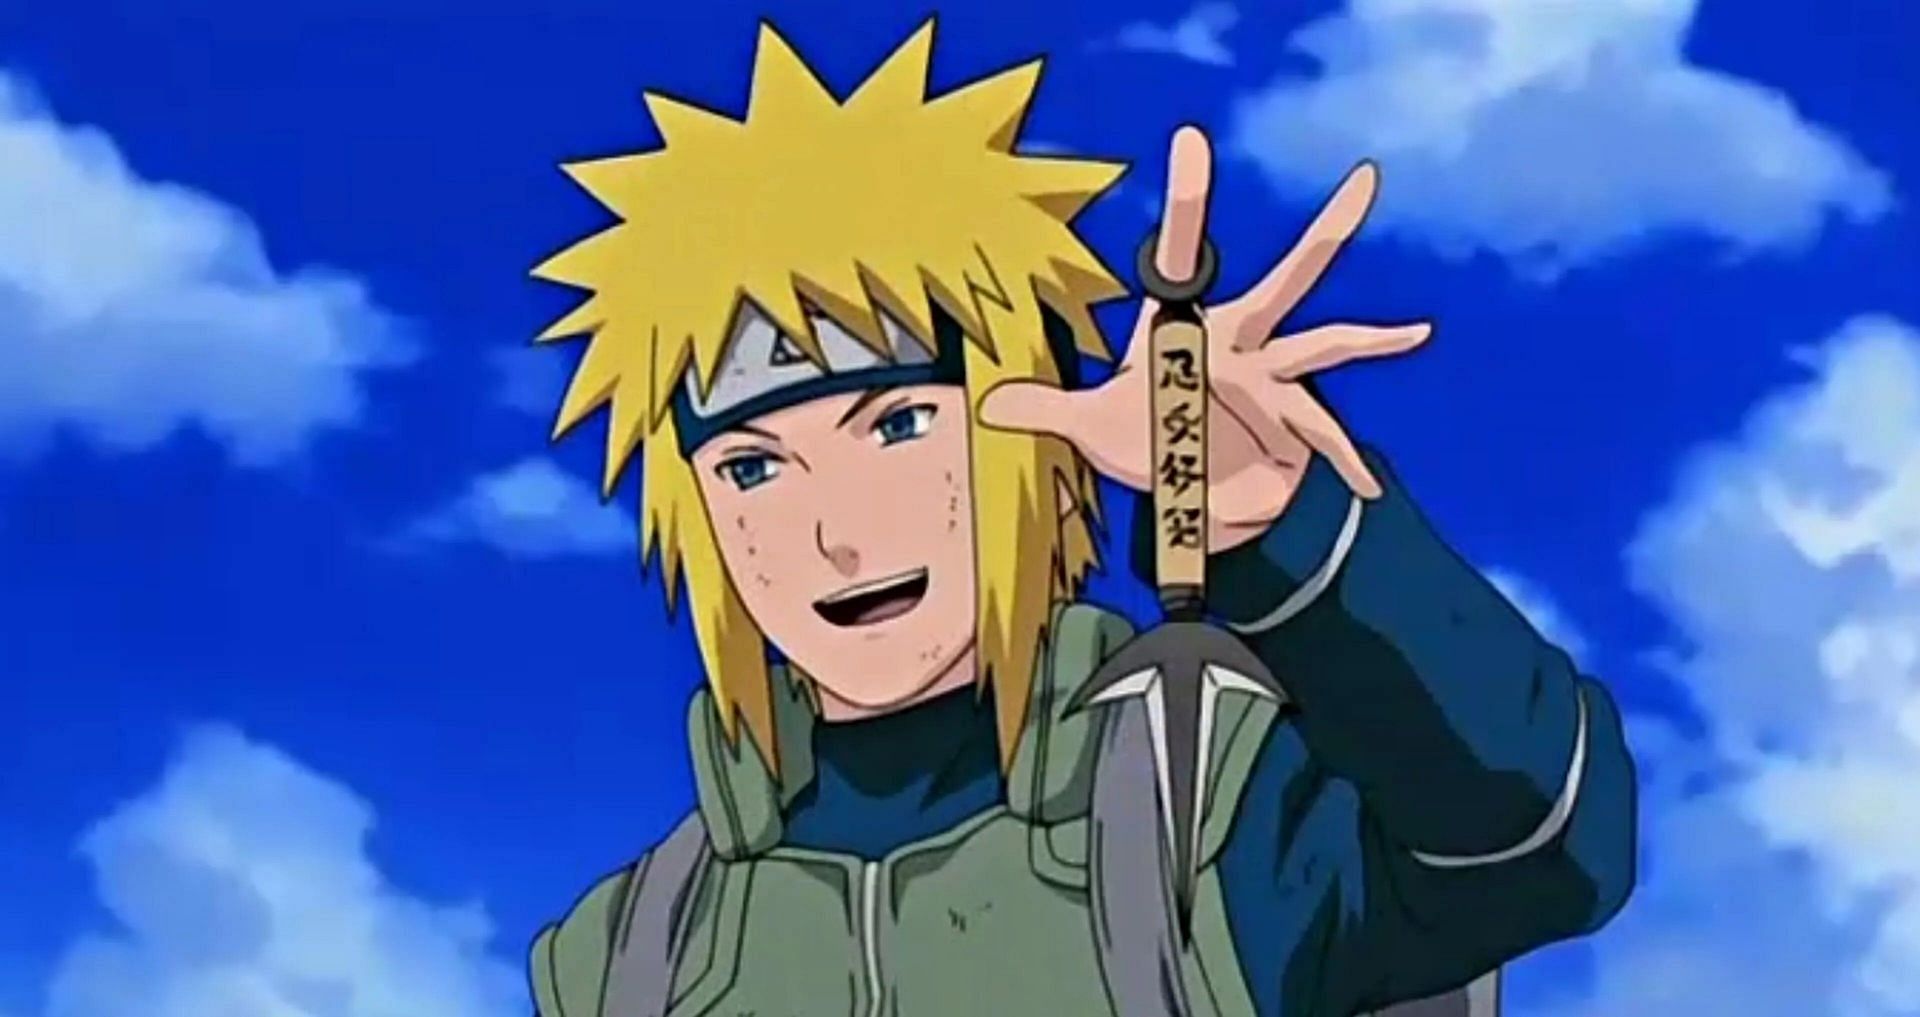 Fans want more of Minato in the series (Image via Studio Pierrot).